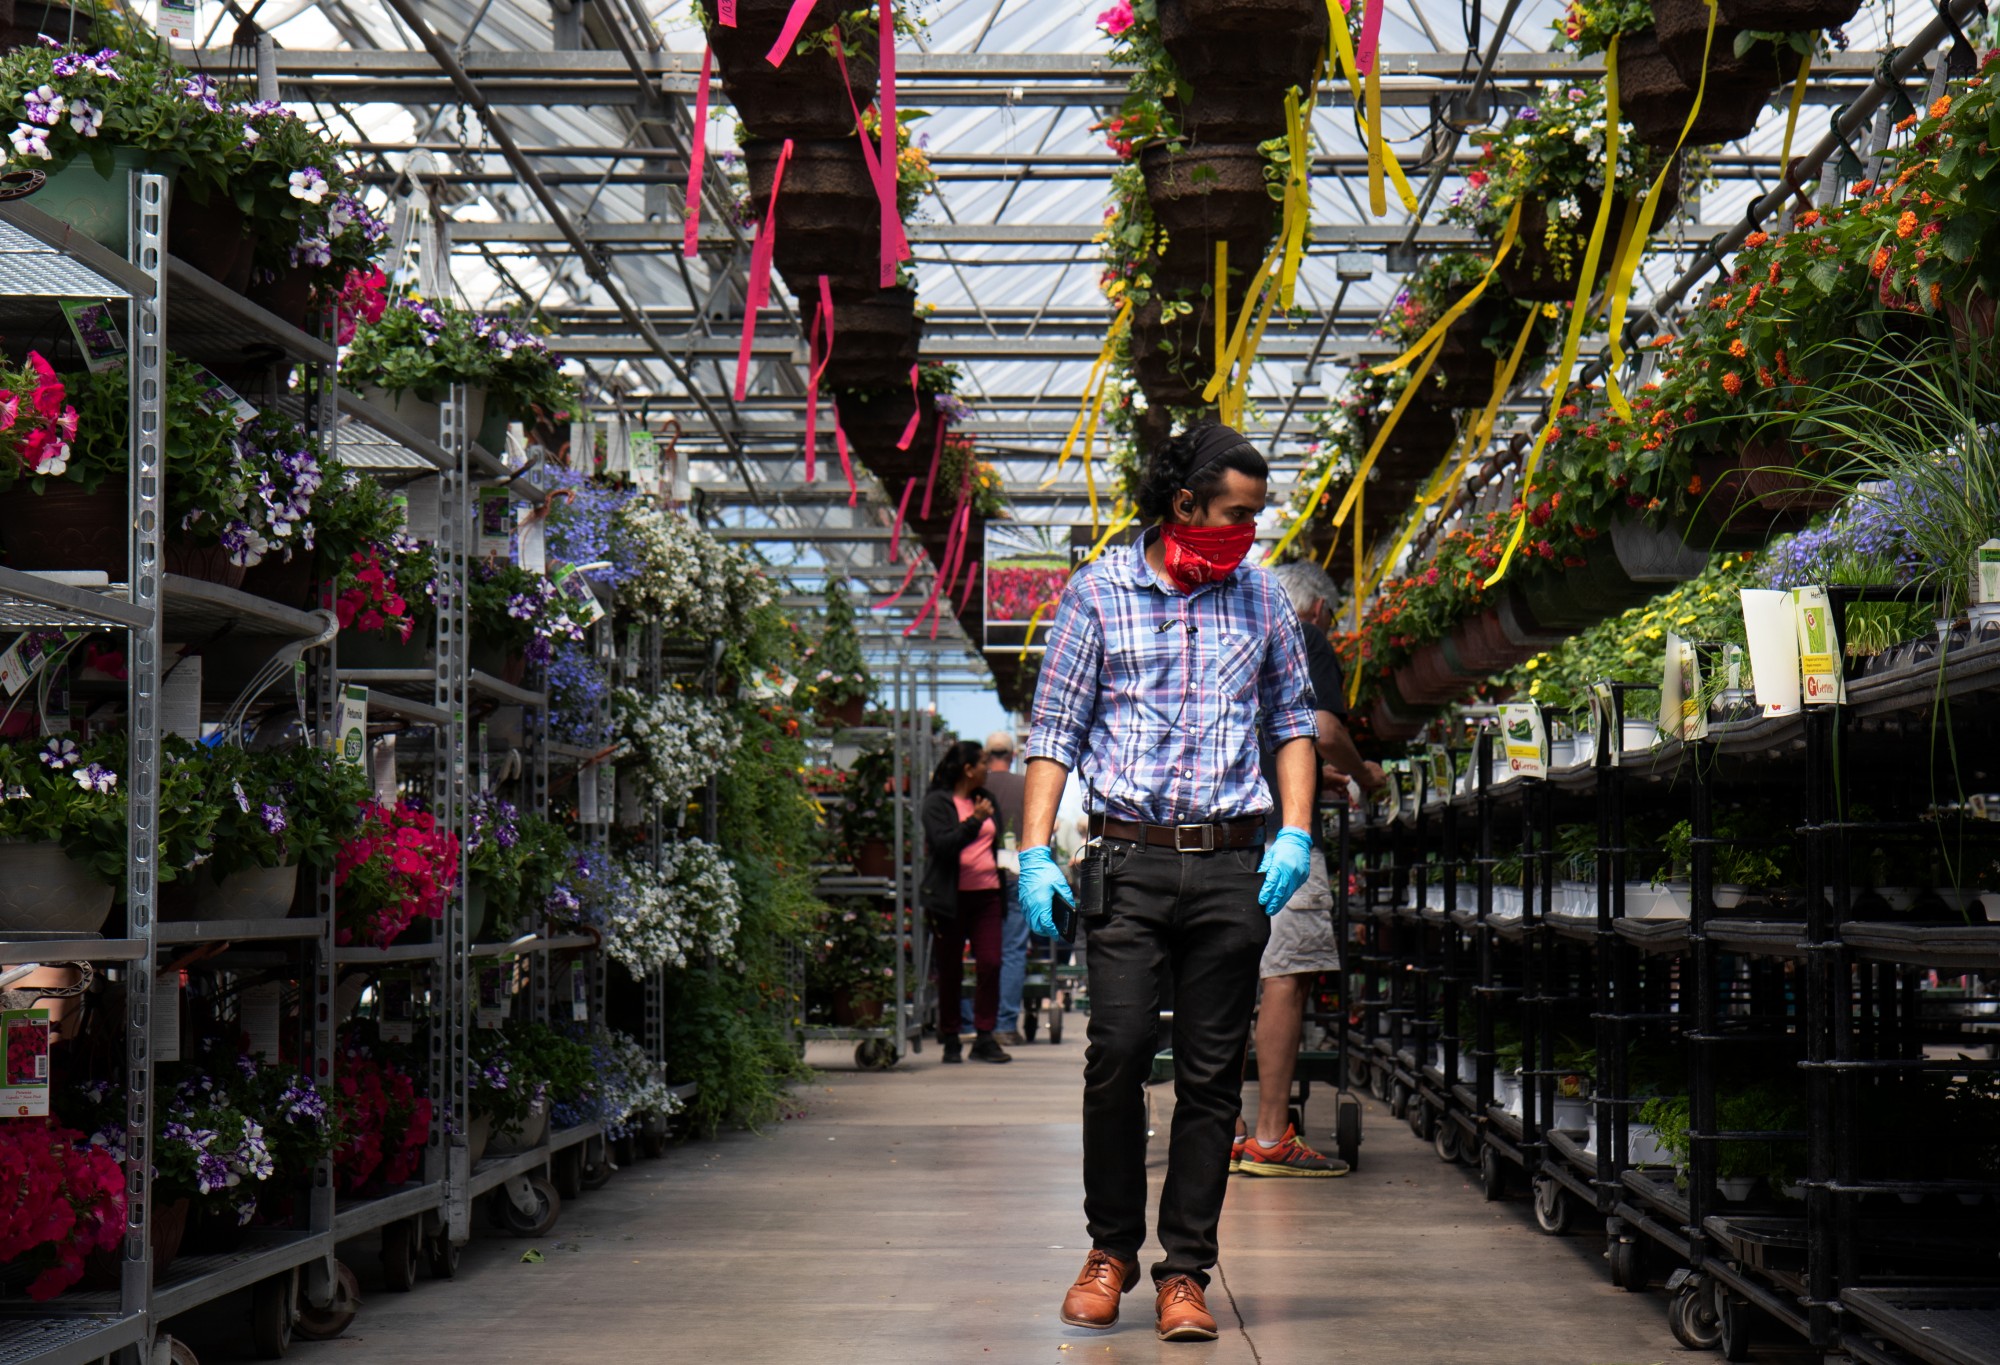 Kabir Khan, a St. Paul State University student and IT and network solutions worker at Gertens, browses the plant selection at Gertens greenhouse and nursery in Inver Grove Heights on Sunday, May 3. “We had to set up almost double the amount [of comuters for chechout stations]…We had to set up 60 to 70 computers so that people can maintain a good distance and the ckeckouts…go by soothly,” Khan said. 